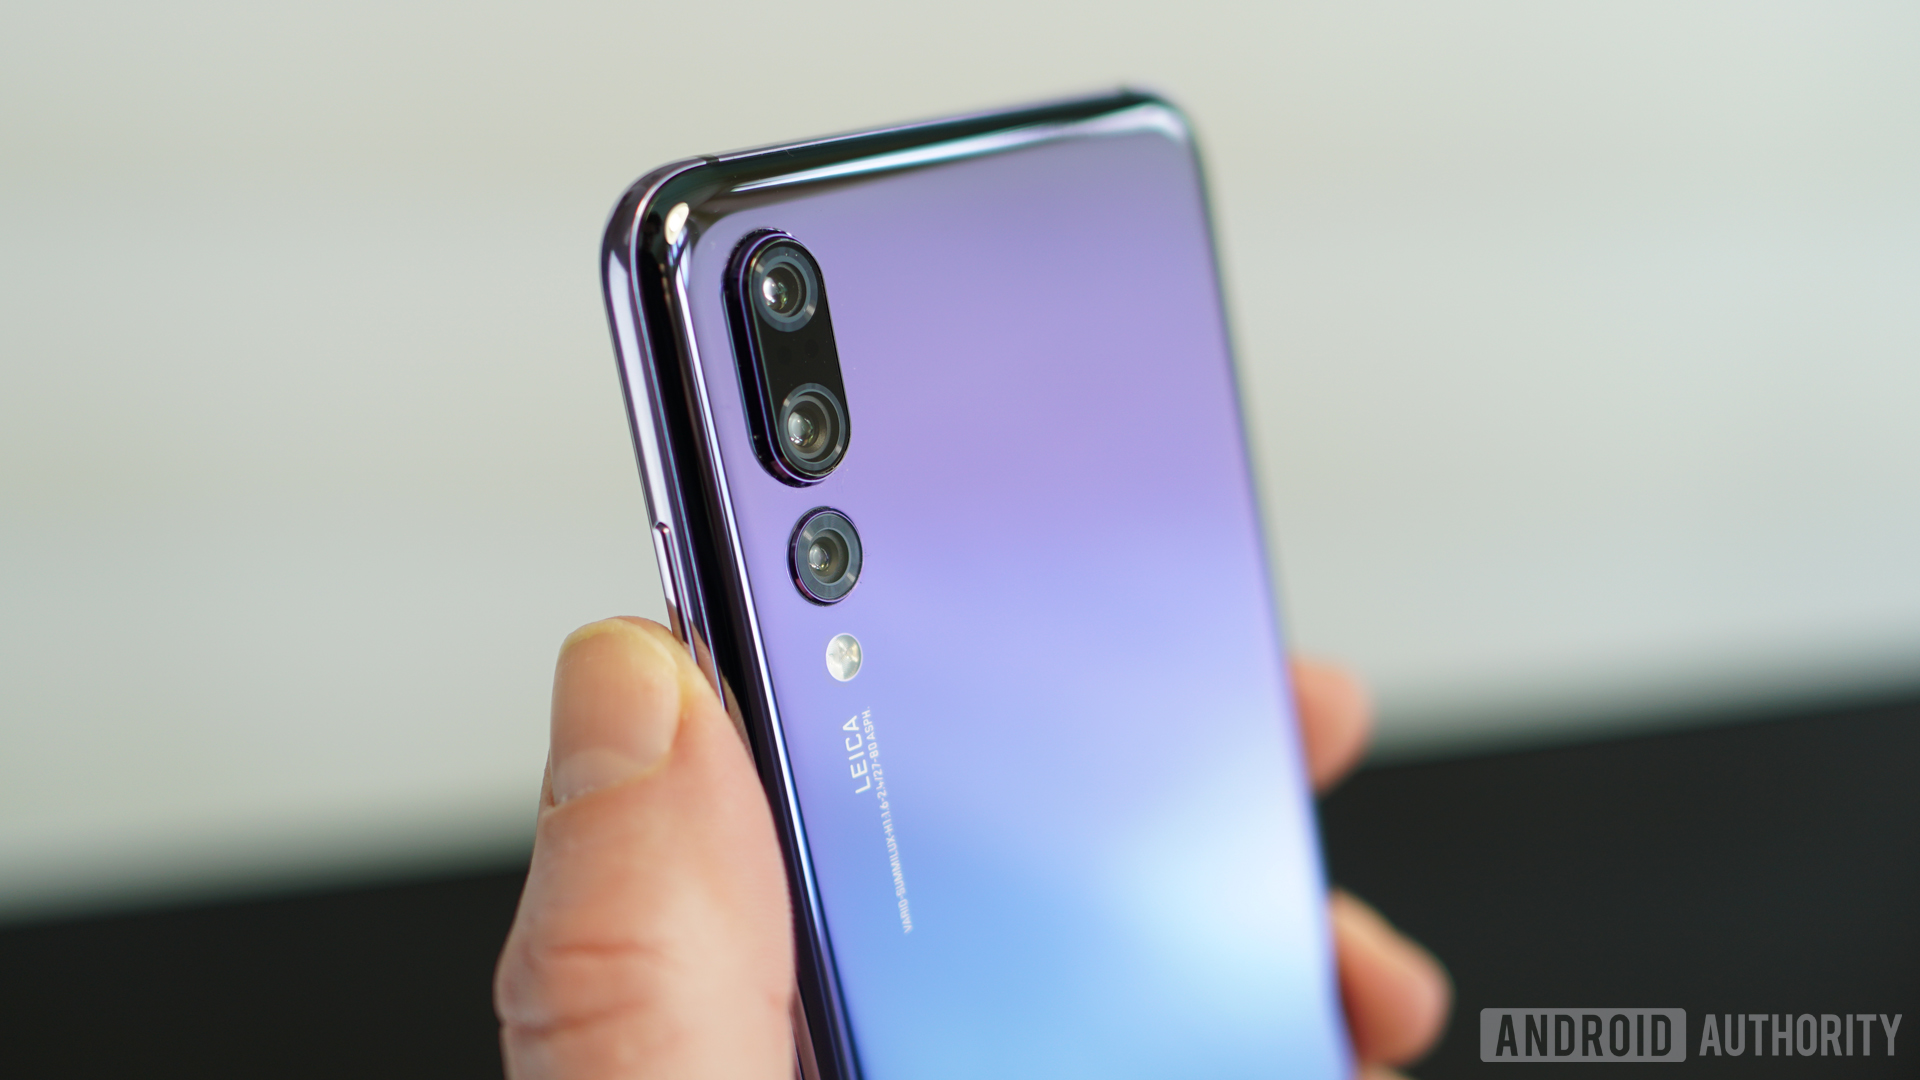 Huawei P20 Pro Android 9.0 Pie